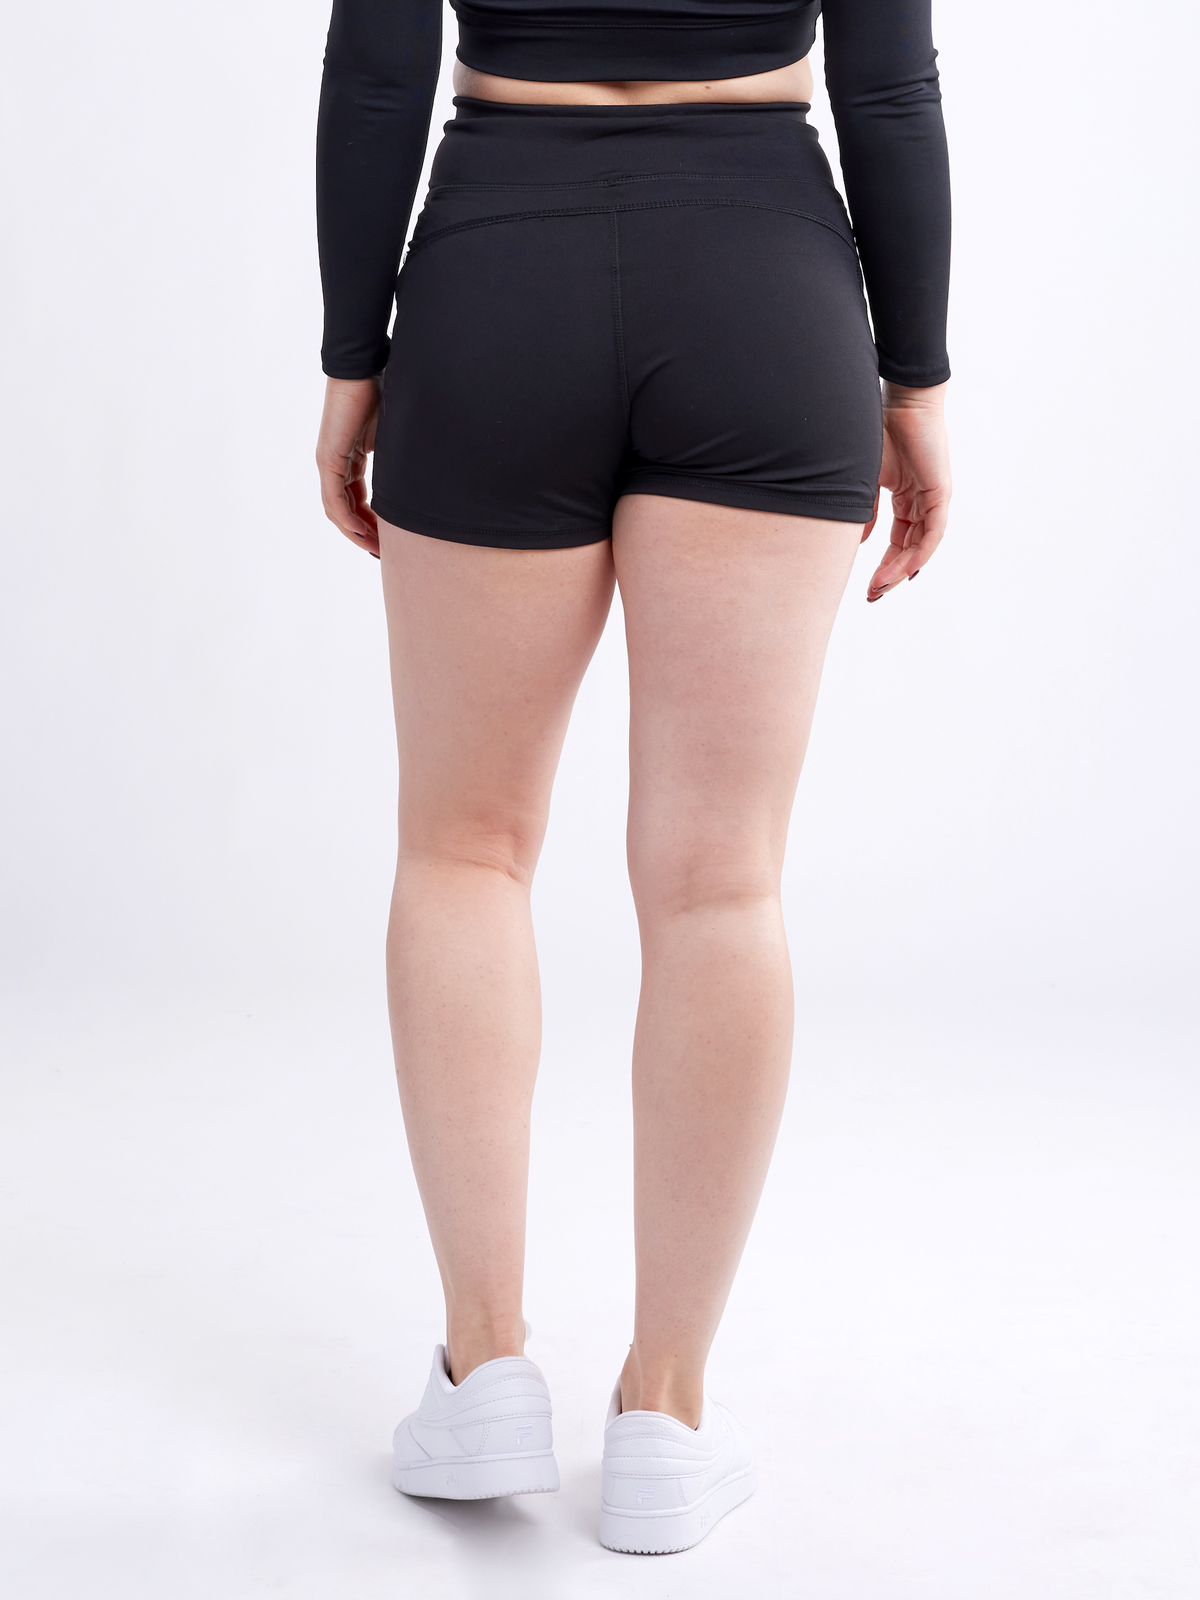 High-Waisted Athletic Shorts with Side Pockets Angelwarriorfitness.com